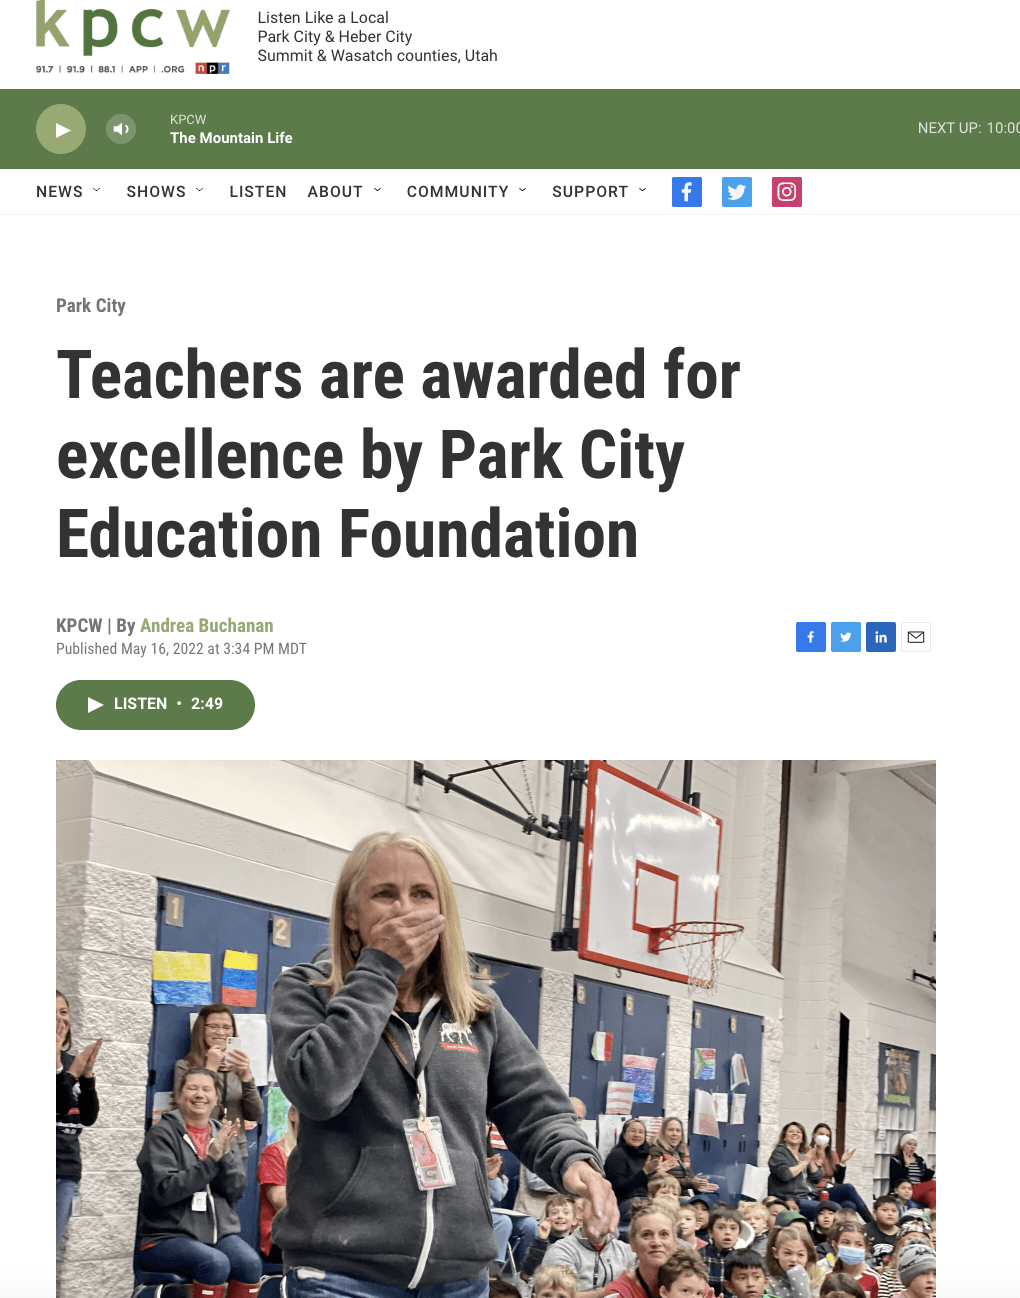 Teachers are awarded for excellence by Park City Education Foundation